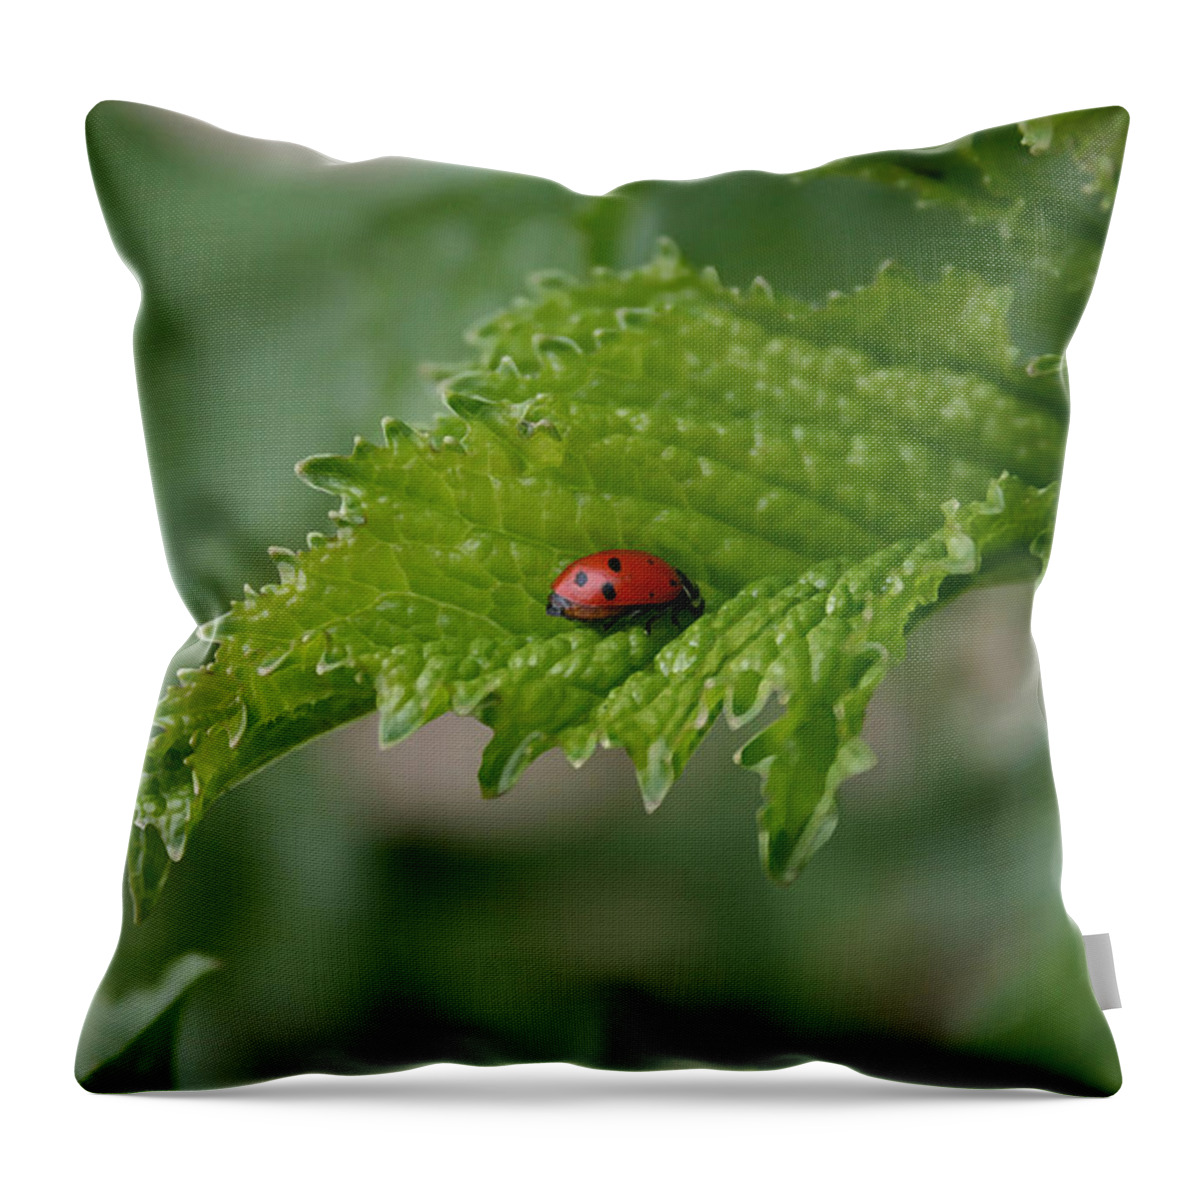 Ladybug Throw Pillow featuring the painting Ladybug by Ellen Henneke